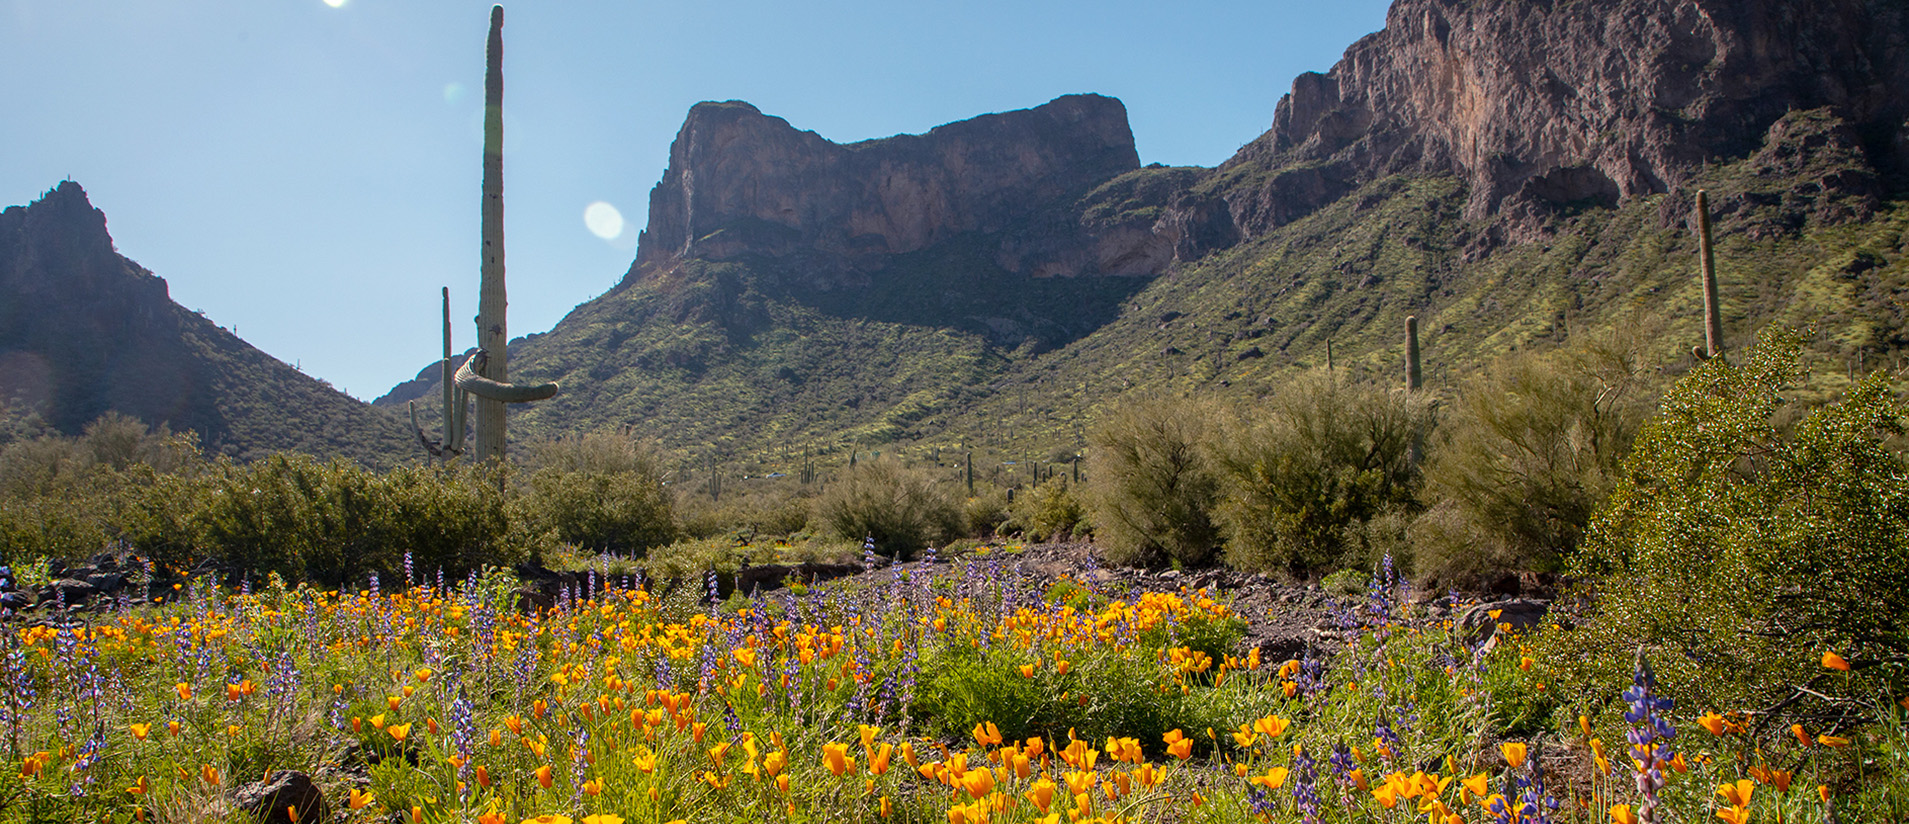 Picacho Peak in the distance, with a blanket of golden wildflowers and a saguaro in the foreground